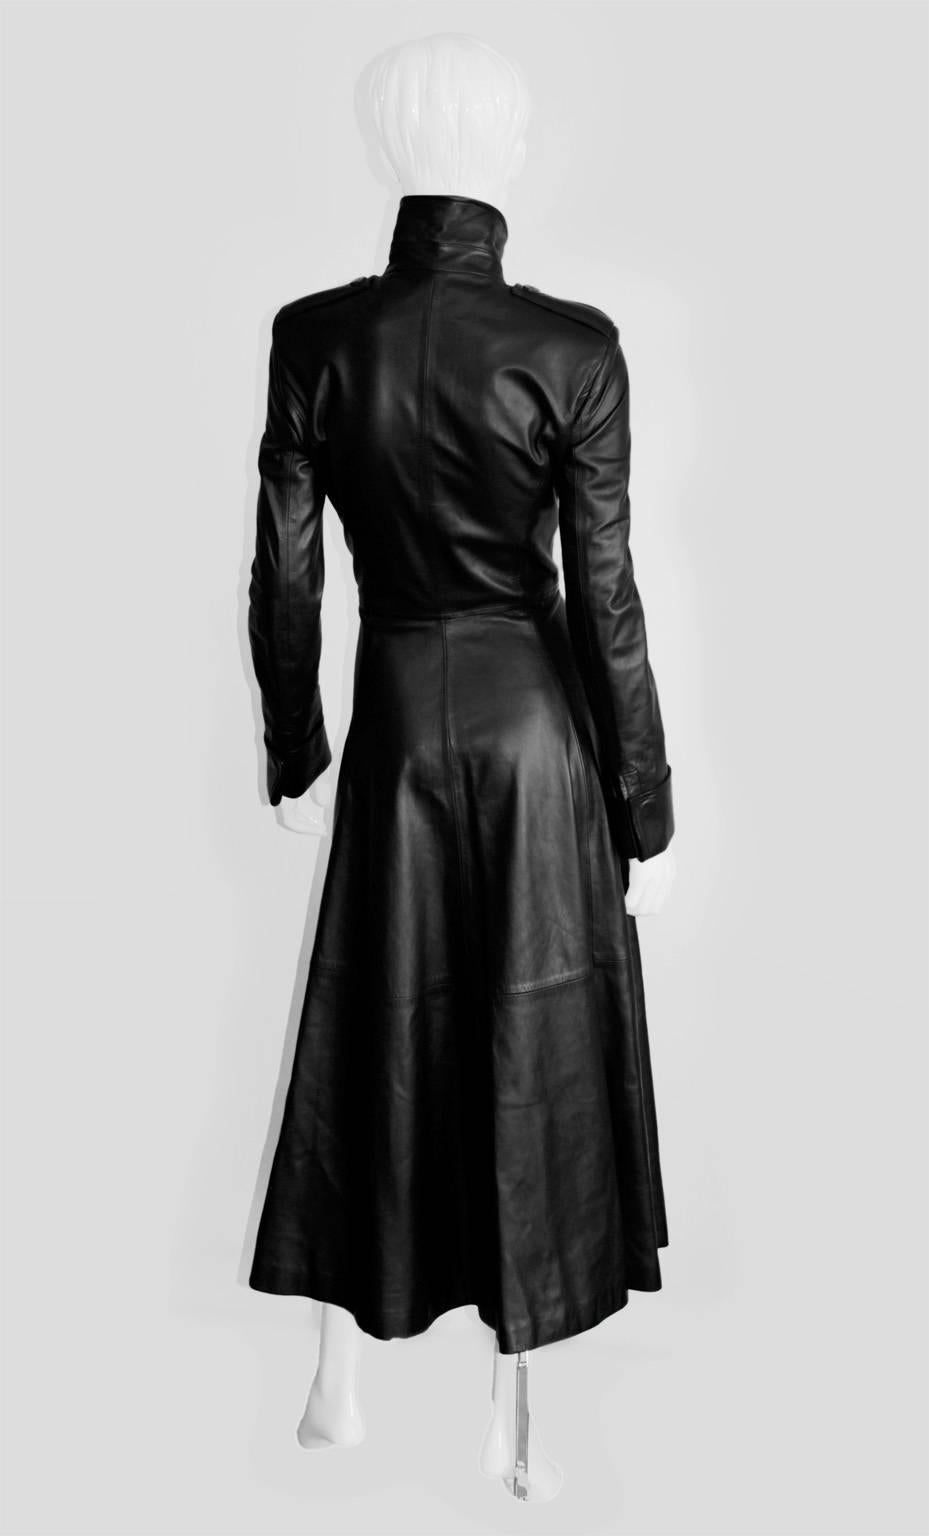 Amazing Tom Ford YSL Rive Gauche FW 2001 Black Full Length Leather Runway Coat In Excellent Condition For Sale In Melbourne, AU